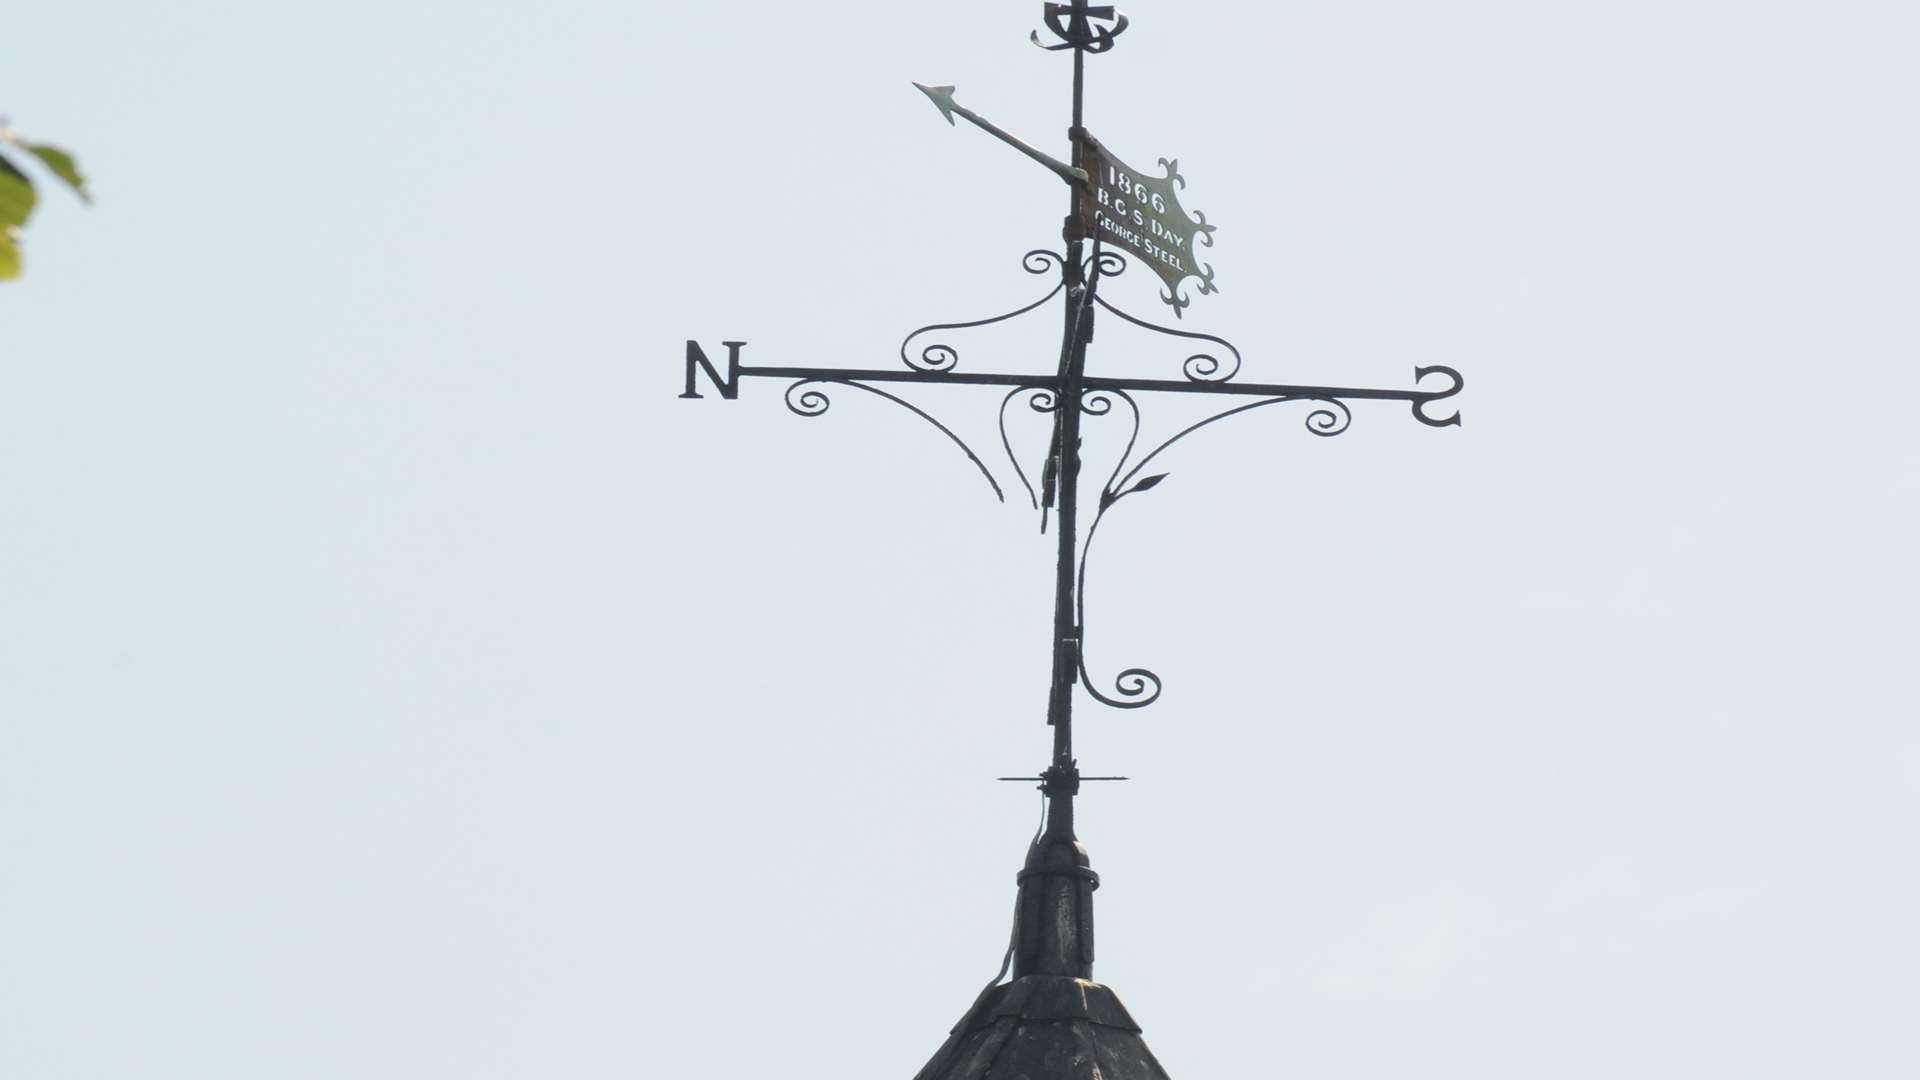 Which Gillingham church has this weather vane?